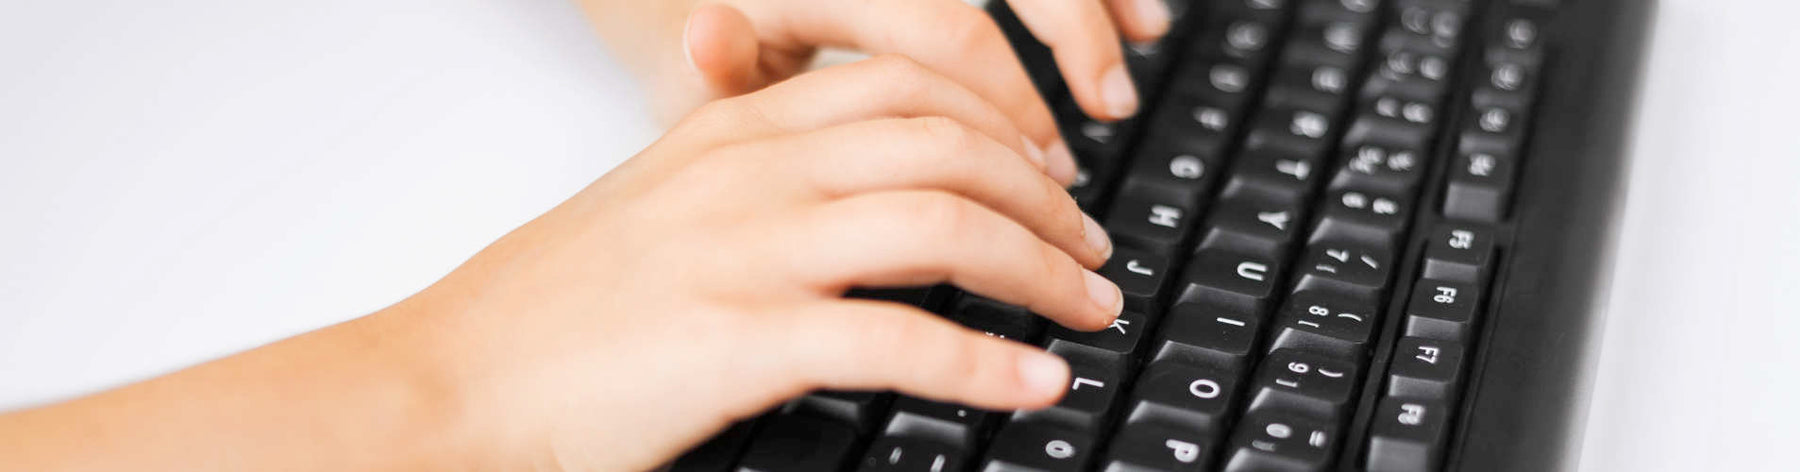 Back to School Top Tips on Keyboard Recognition Skills